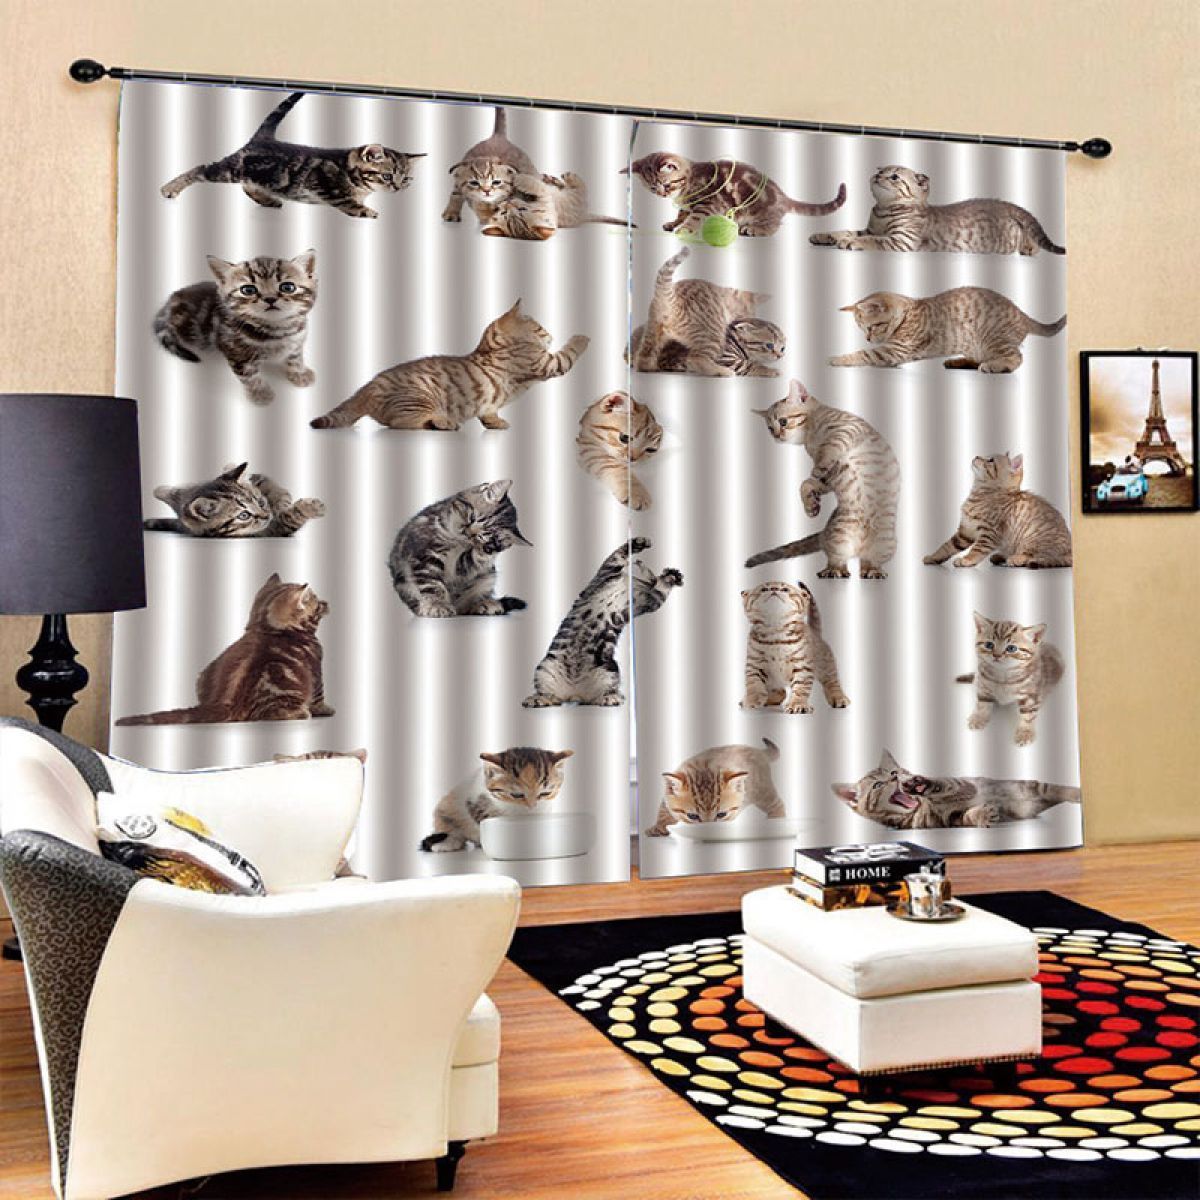 3d Cat Hanging Printed Window Curtain Home Decor